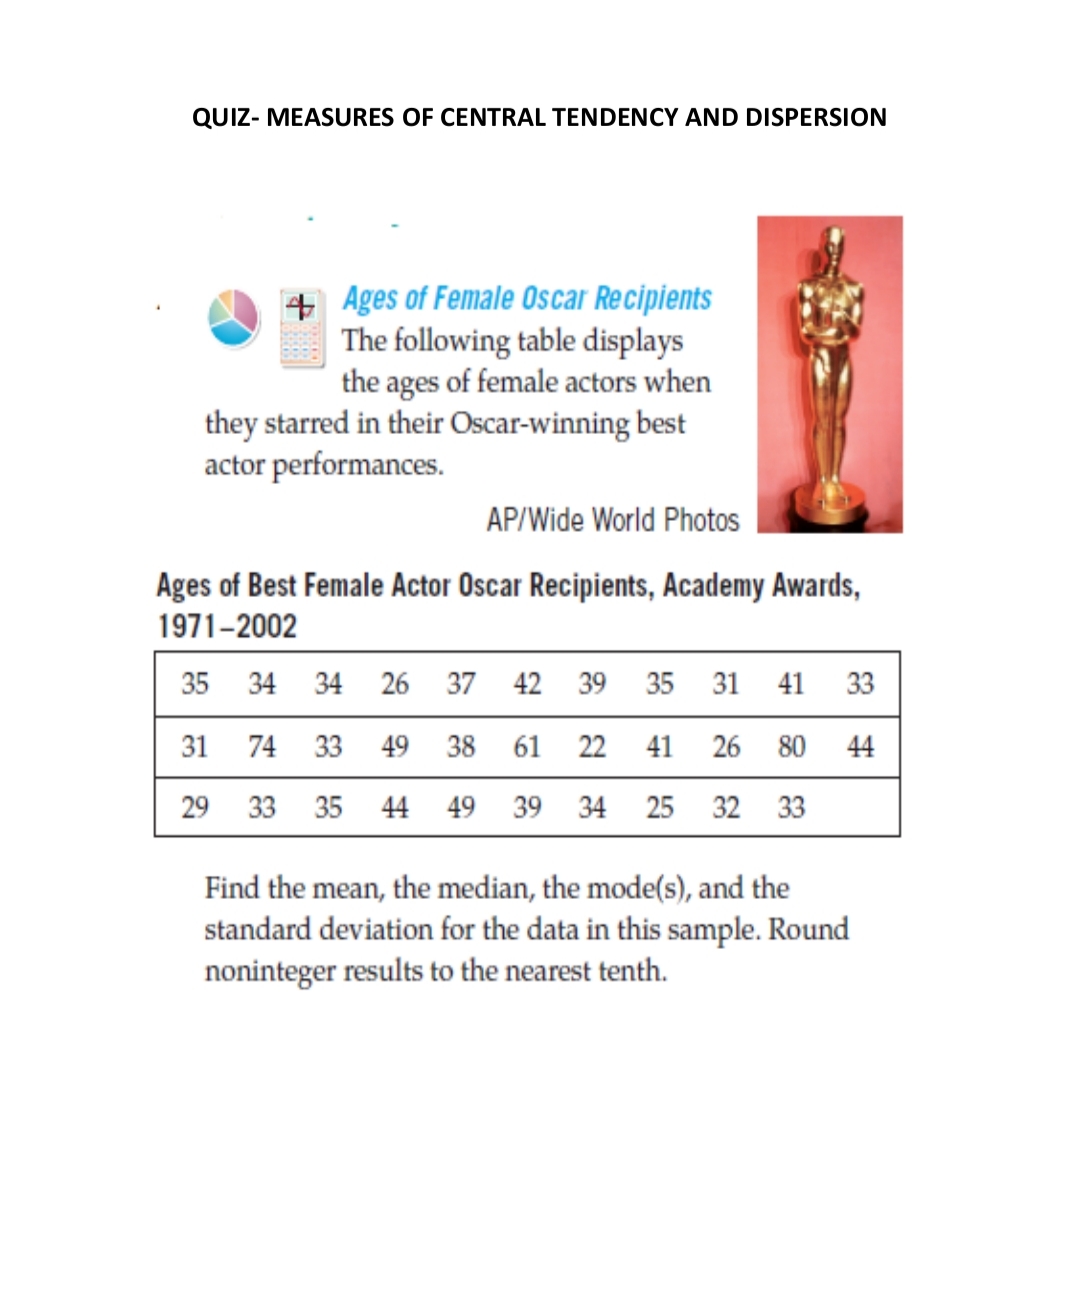 QUIZ- MEASURES OF CENTRAL TENDENCY AND DISPERSION
+ Ages of Female Oscar Recipients
The following table displays
the ages of female actors when
they starred in their Oscar-winning best
actor performances.
AP/Wide World Photos
Ages of Best Female Actor Oscar Recipients, Academy Awards,
1971-2002
35 34 34 26 37 42 39 35 31 41 33
31
74 33 49
61
22 41
26 80 44
29 33 35 44 49 39 34 25 32 33
Find the mean, the median, the mode(s), and the
standard deviation for the data in this sample. Round
noninteger results to the nearest tenth.
